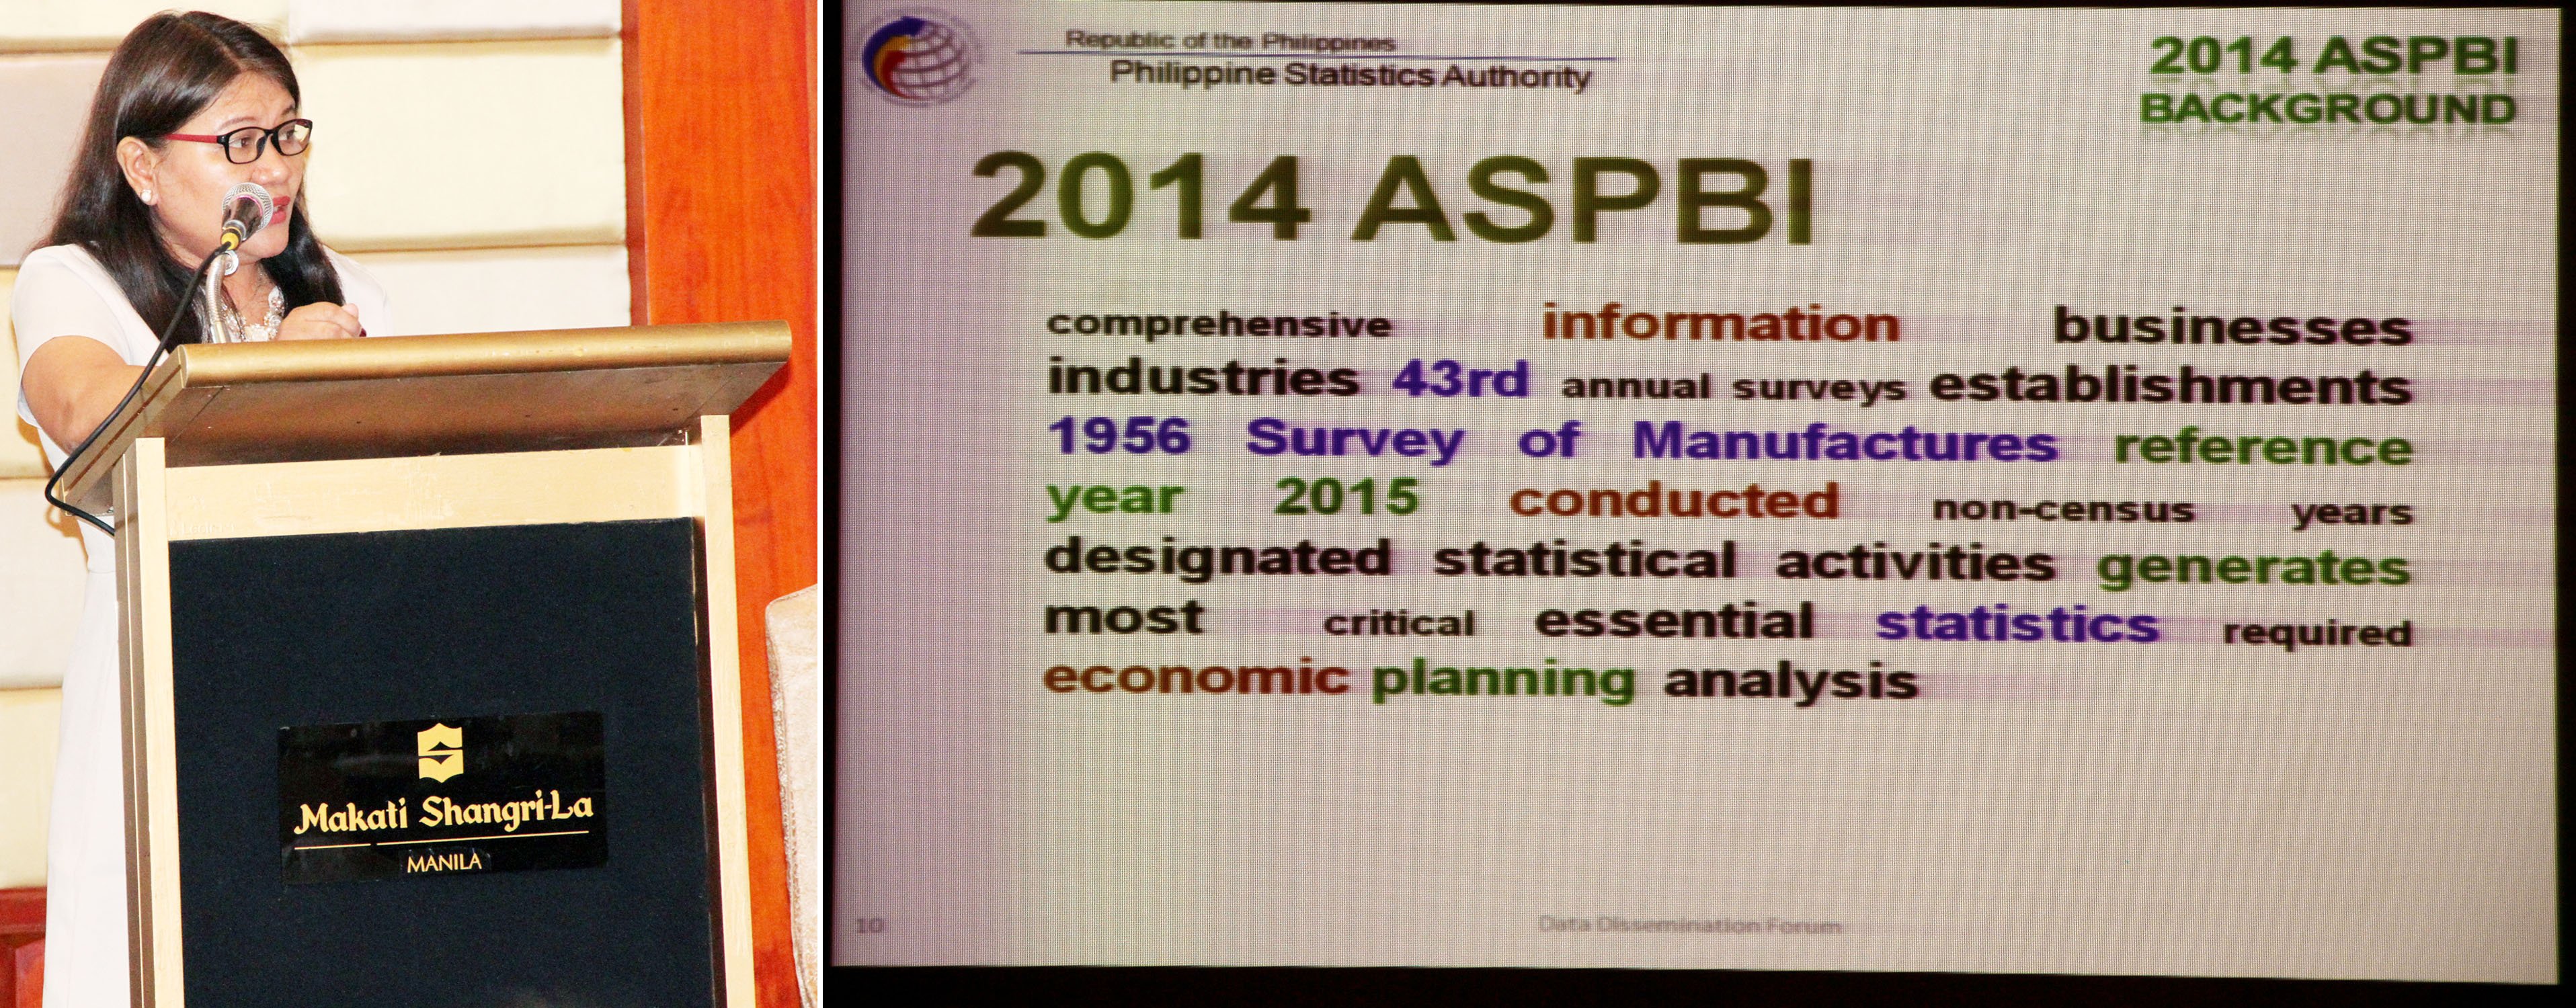 PSA 2014 Annual Survey of Philippine Business and Industry (ASPBI) background